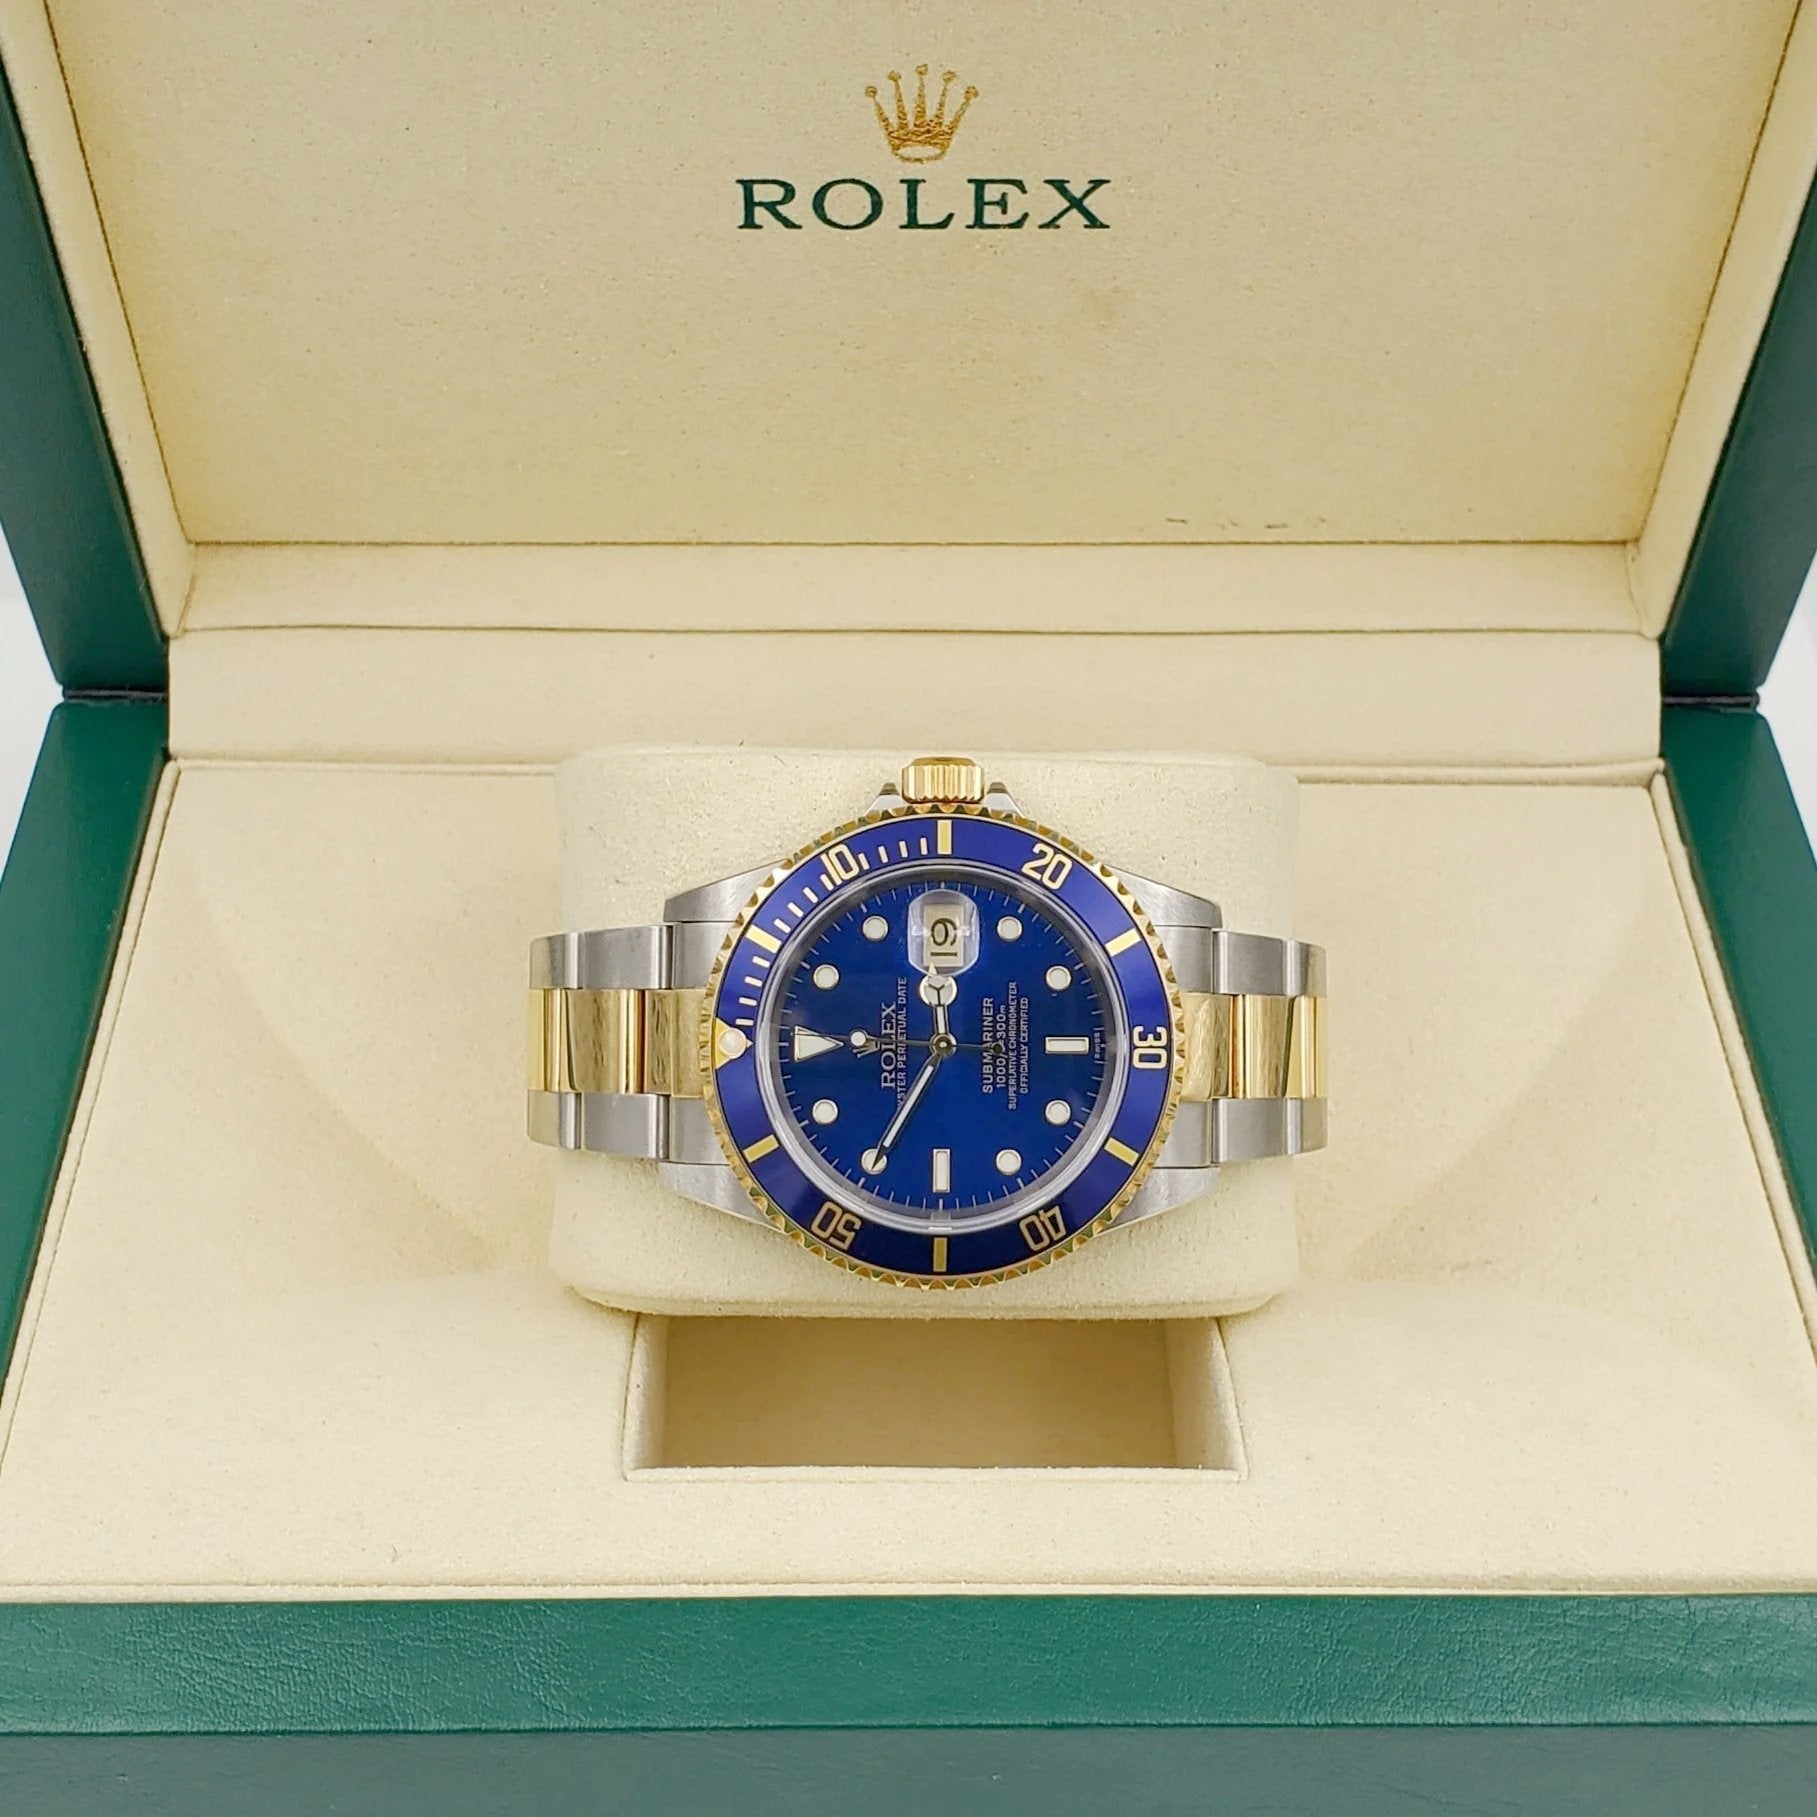 2005 Men's Rolex 40mm Submariner Oyster Perpetual Two Tone 18K Yellow Gold / Stainless Steel Wristwatch w/ Blue Dial & Blue Bezel. (Pre-Owned 16613)